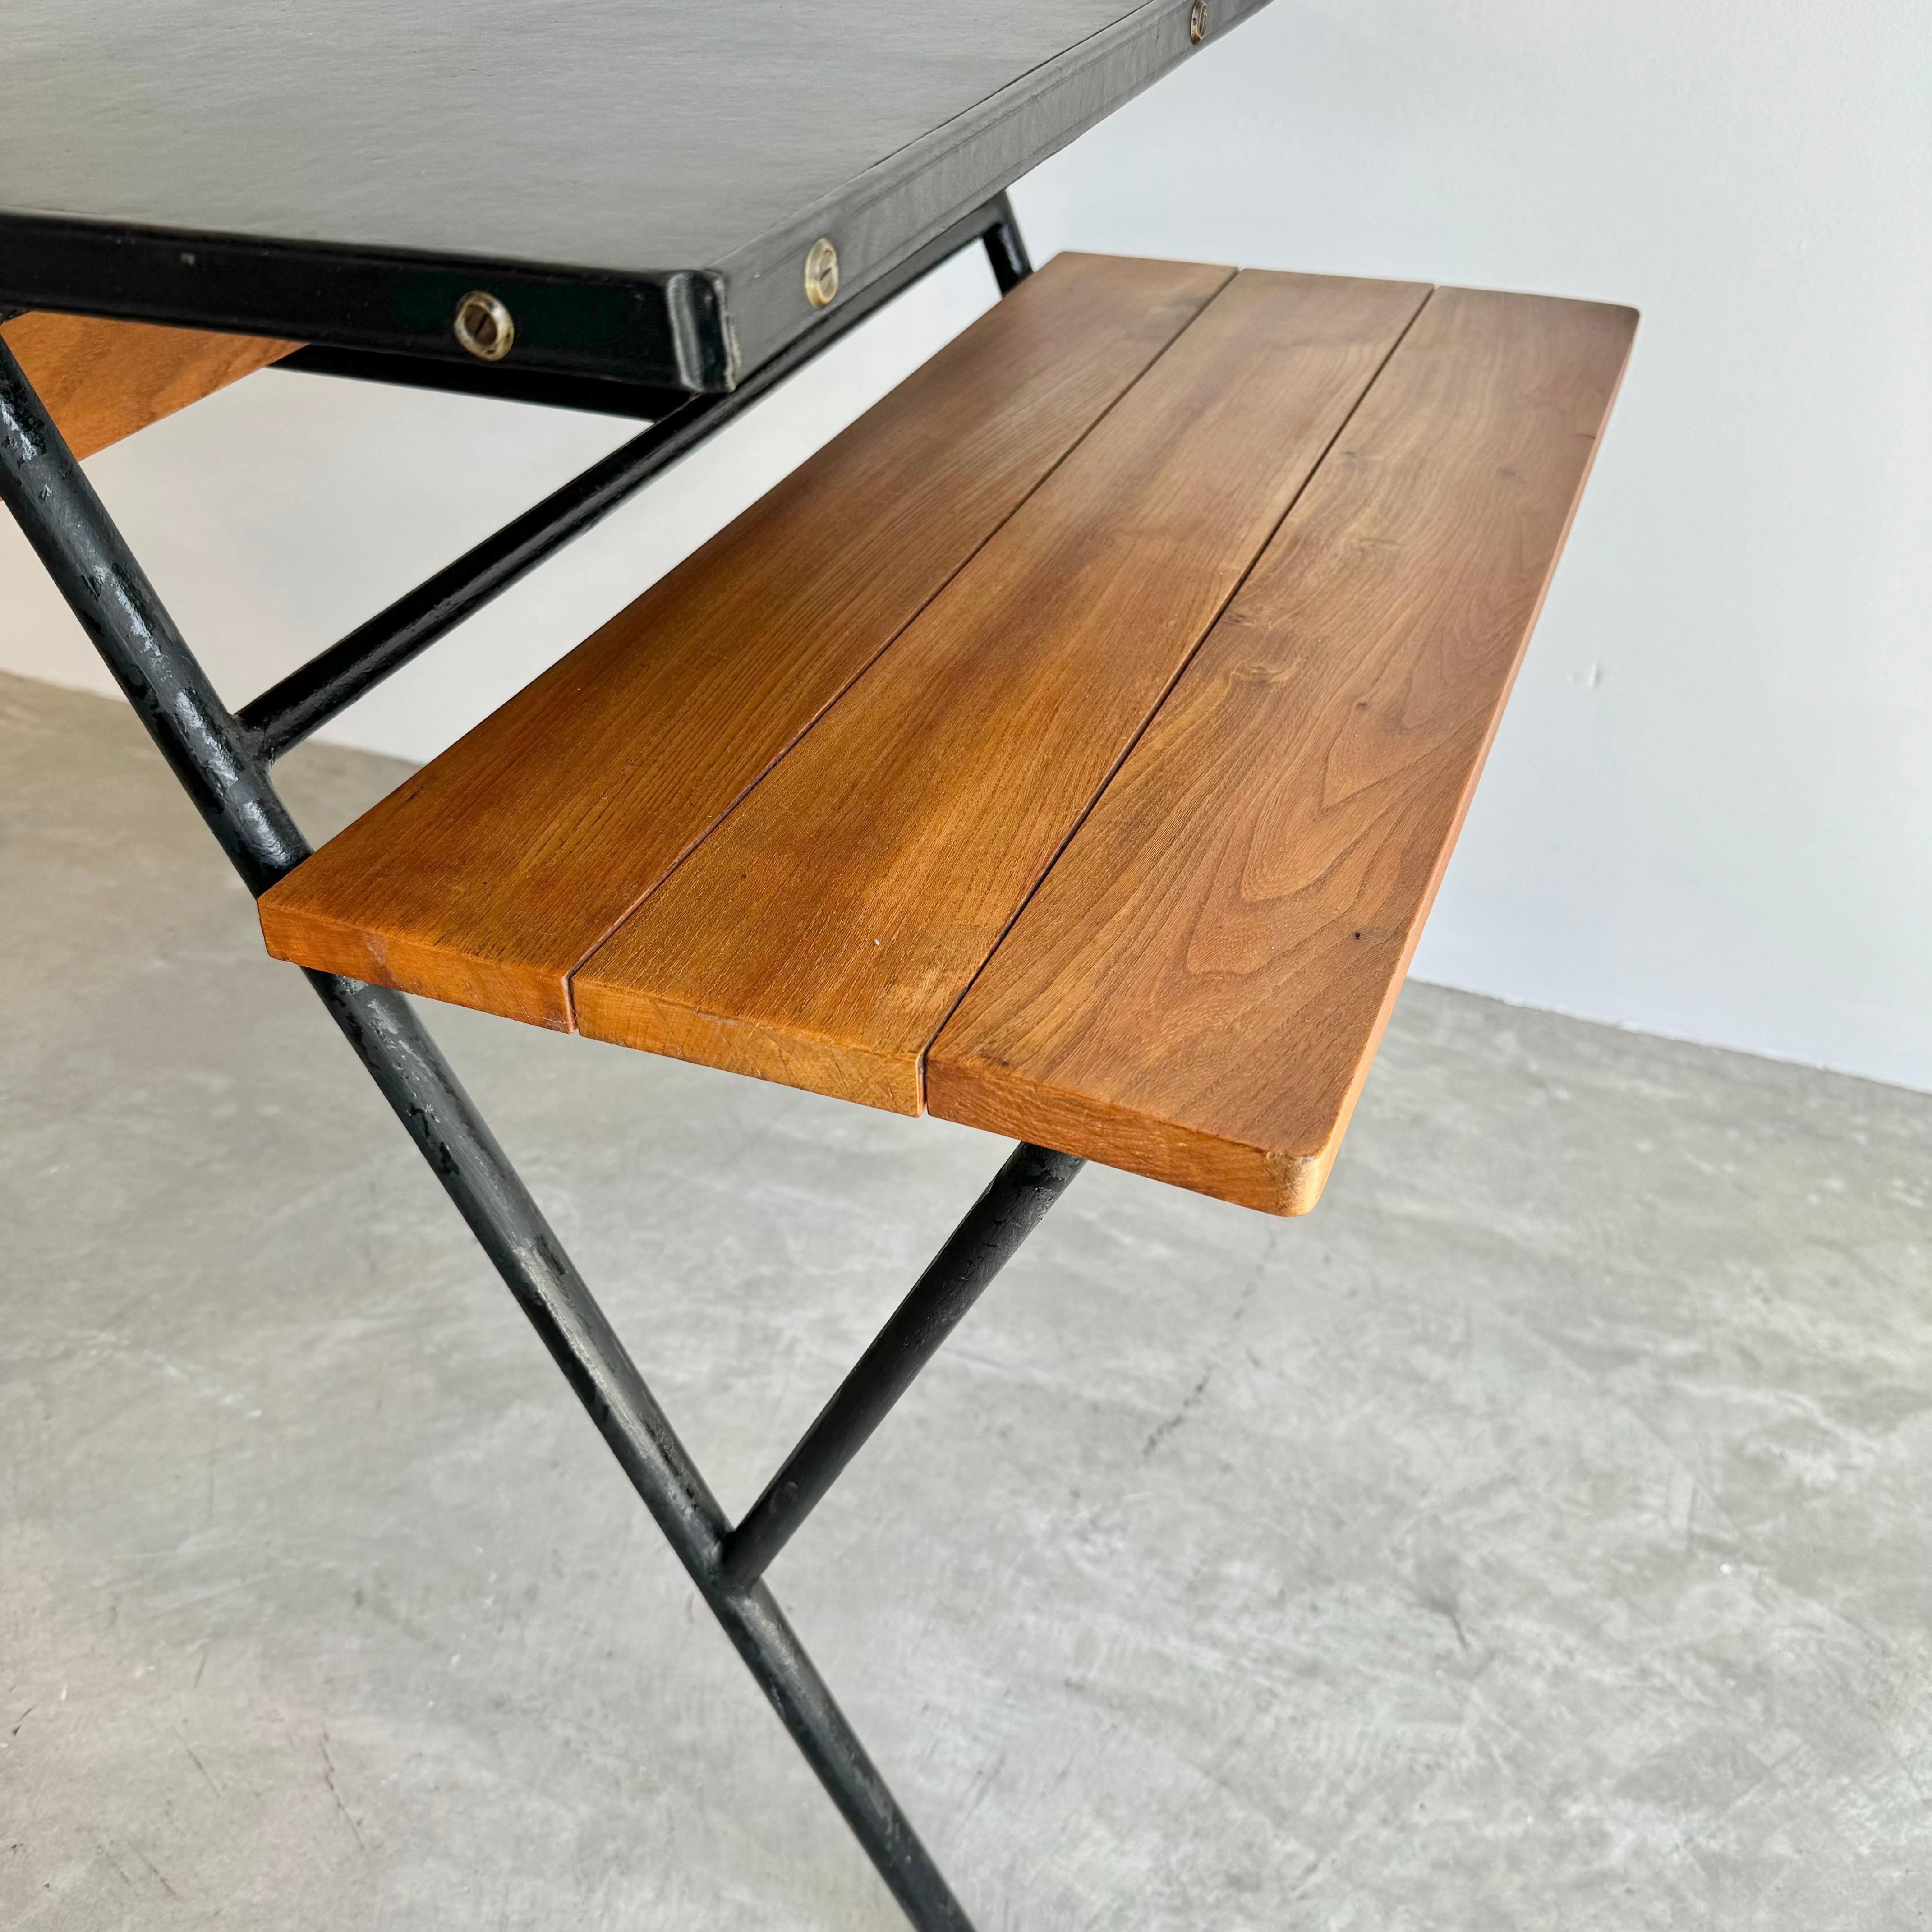 Leather Jacques Adnet Iron and Oak Desk, 1950s France For Sale